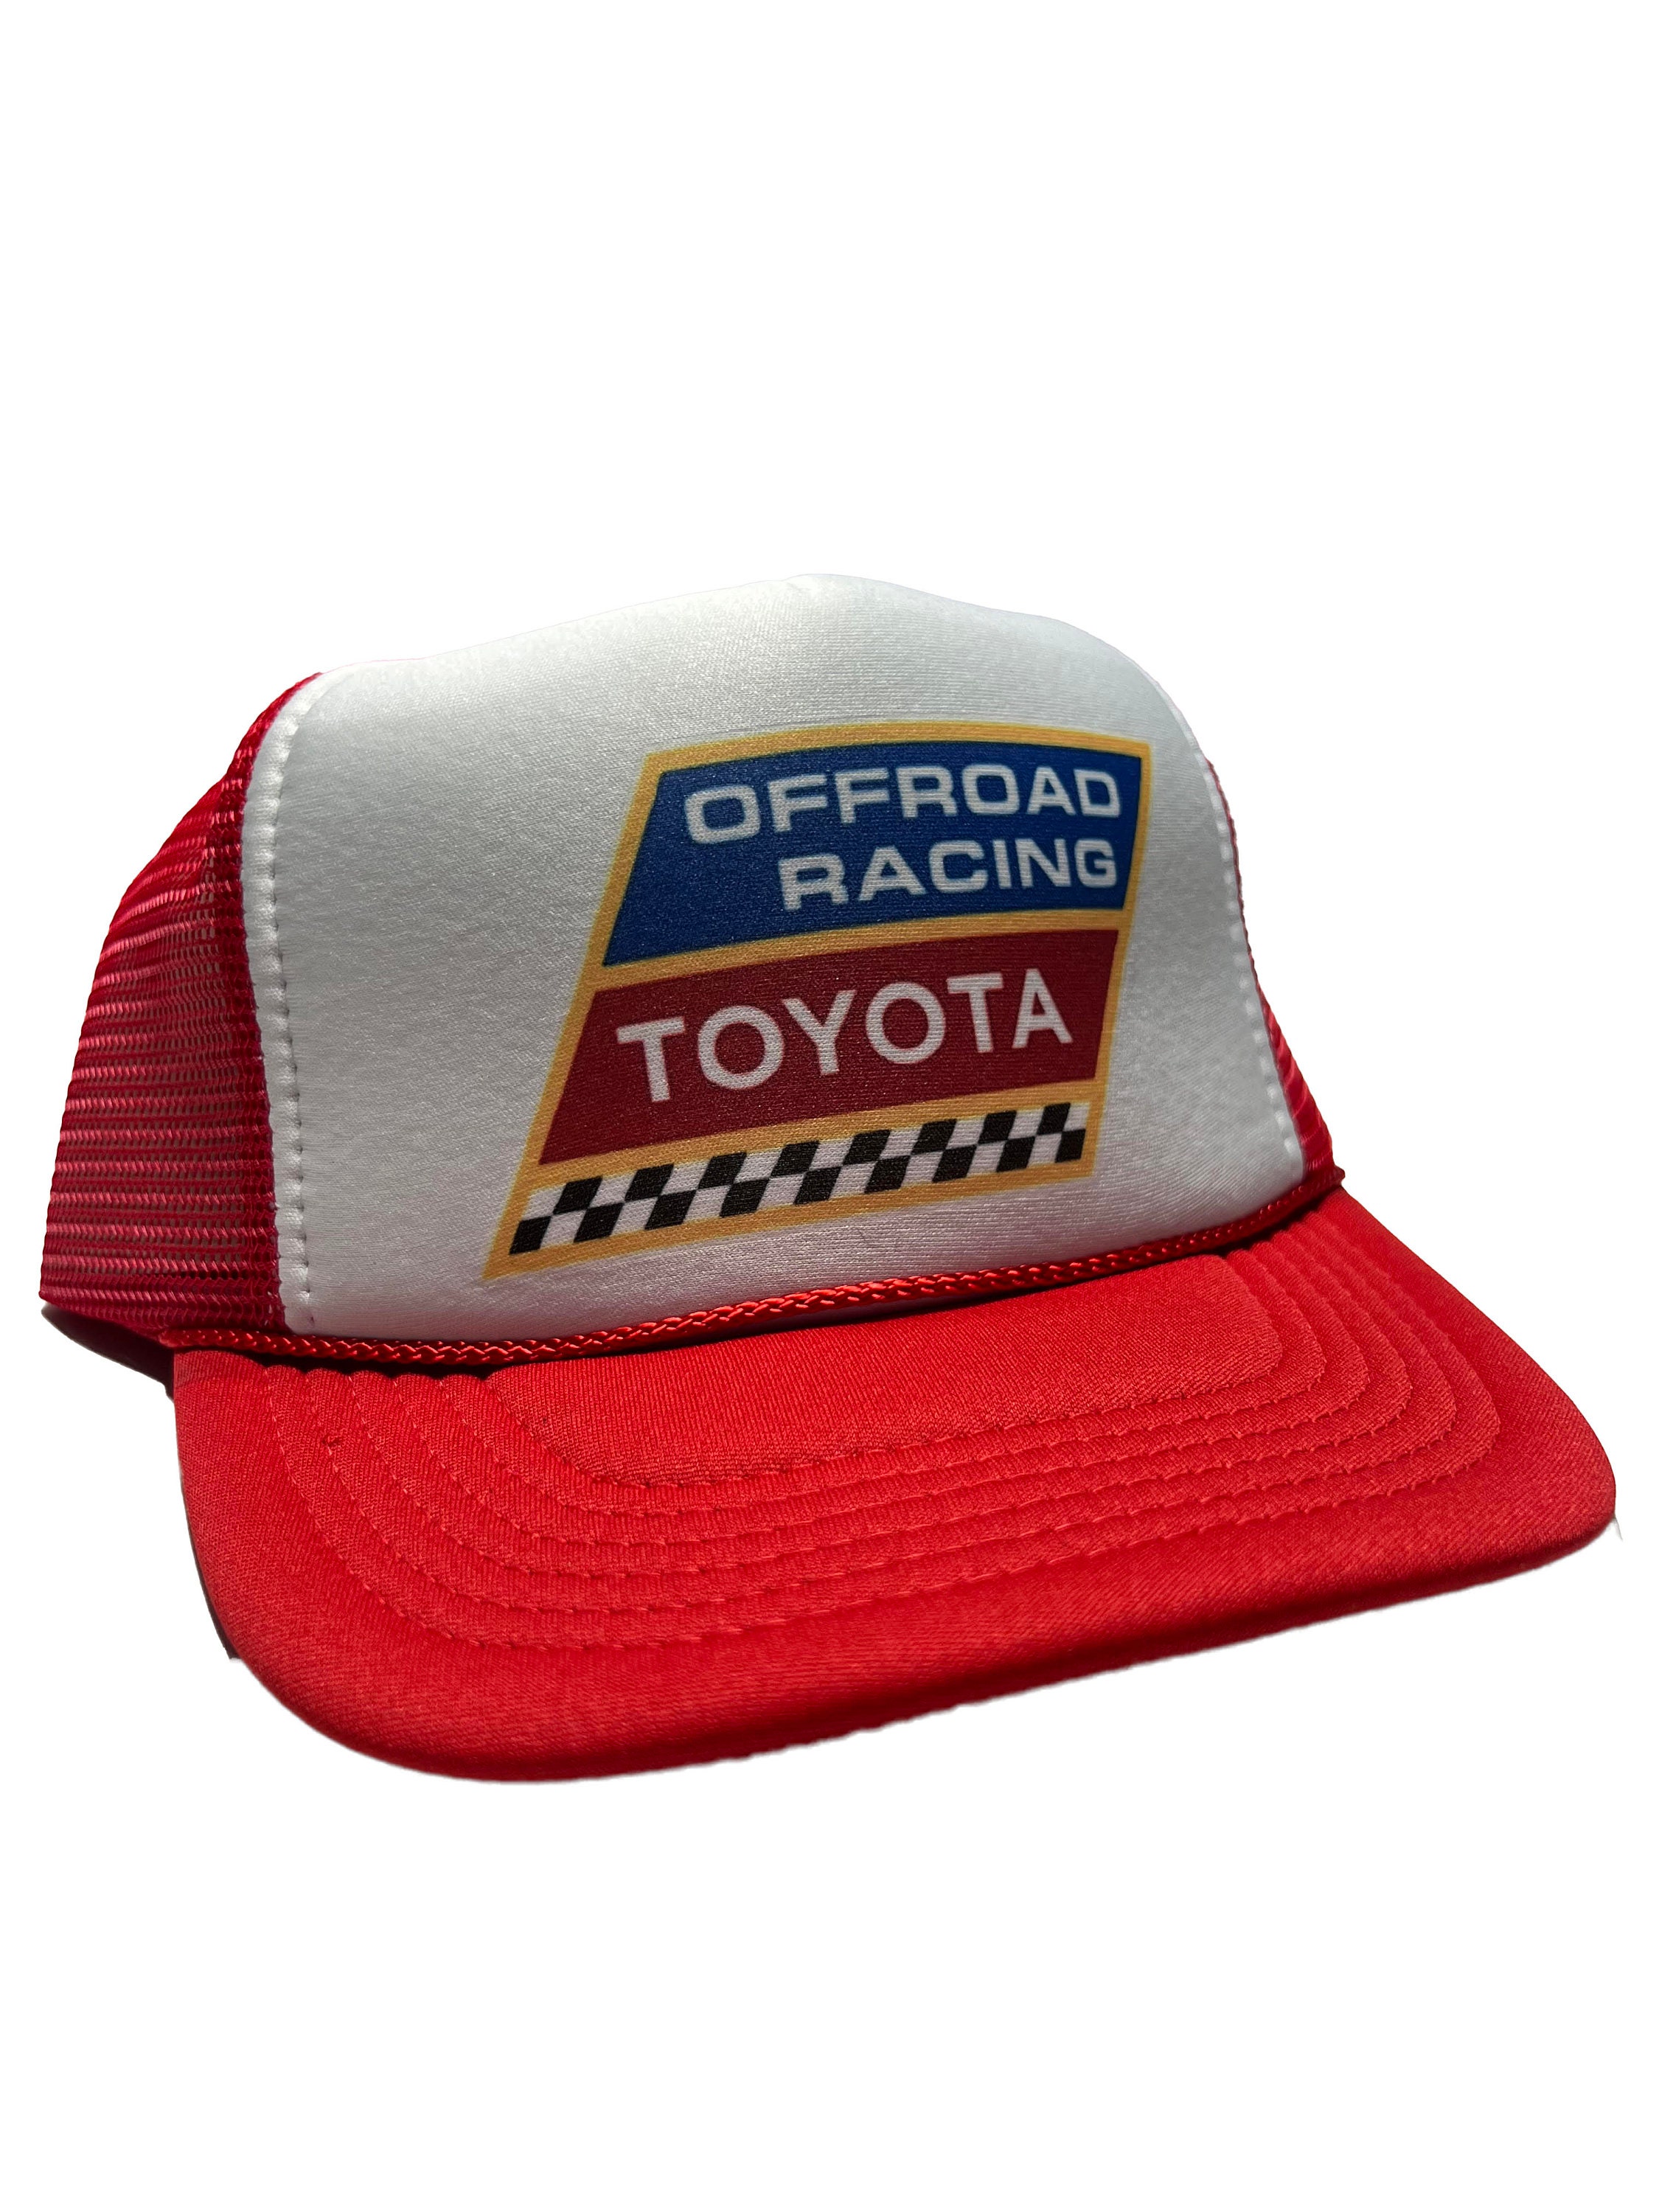 Toyota Offroad Racing Trucker Hat Vintage Style Red Mesh Snapback